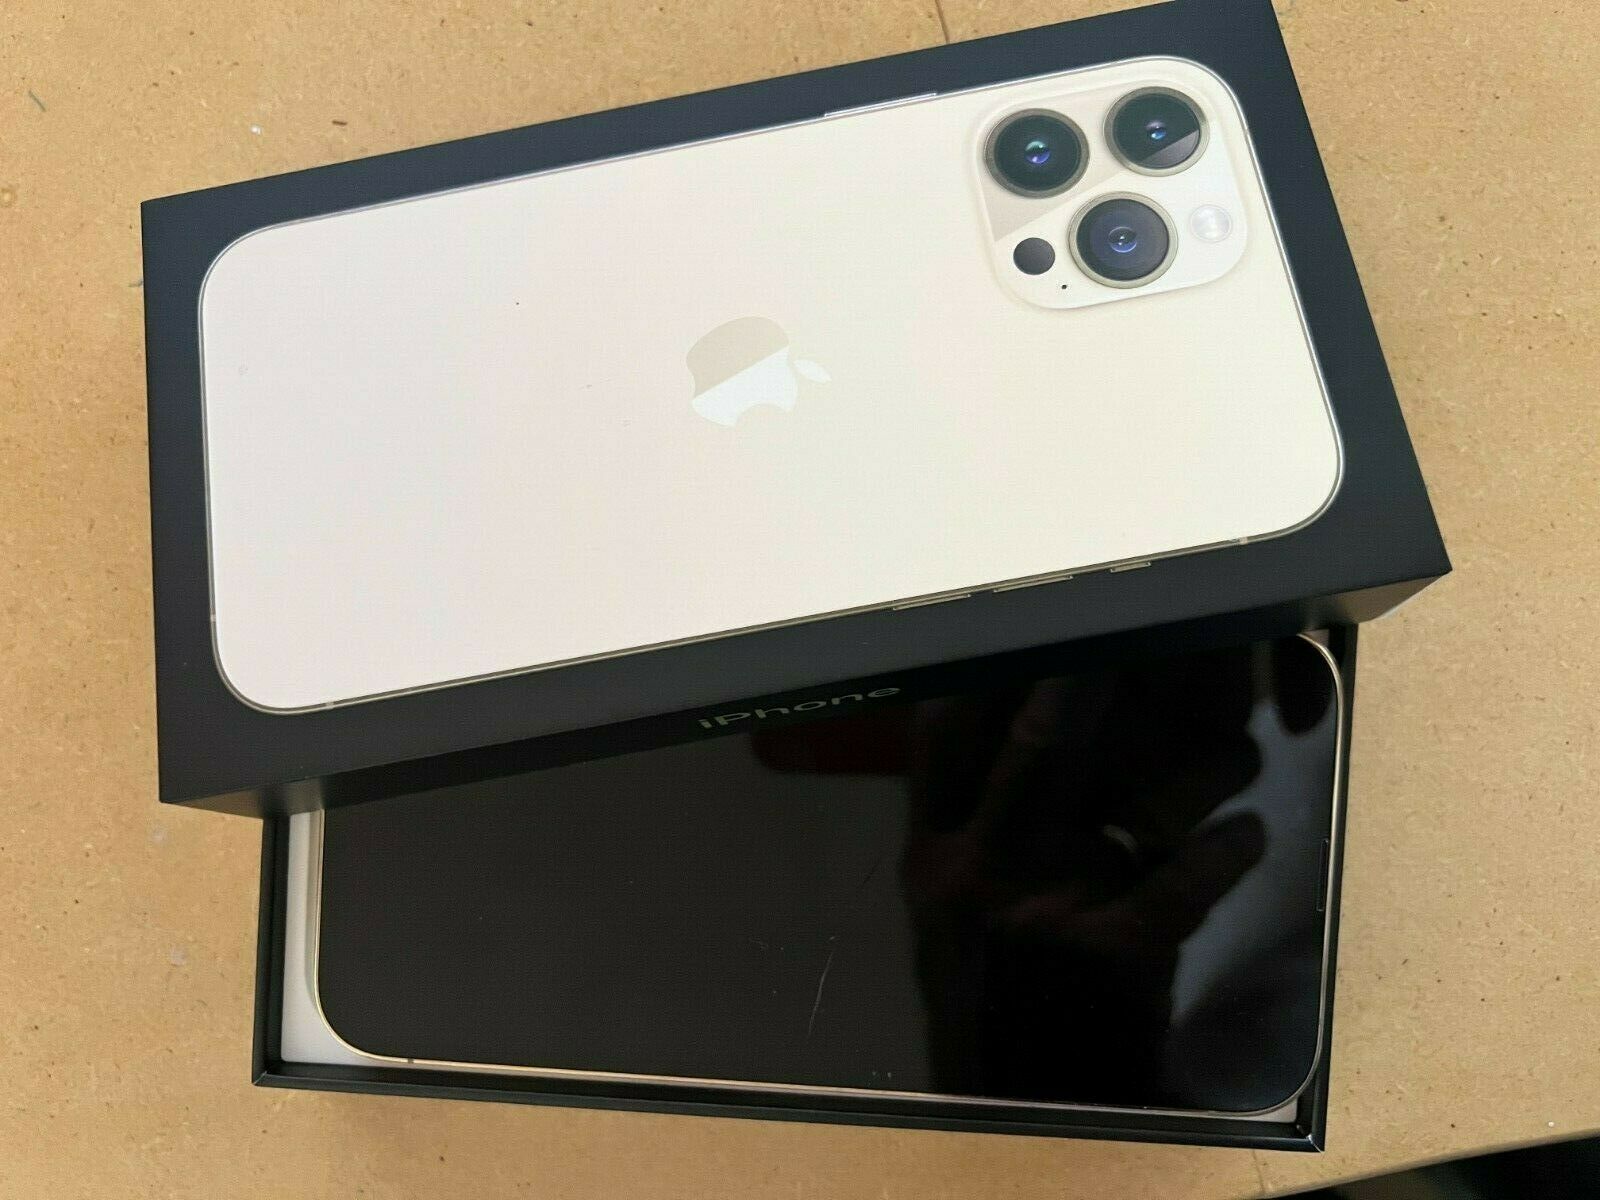 Apple iPhone 13 pro max  512GB  Factory unlocked Apple iPhone 13 pro max  512GB  Factory unlocked new never used with complete accessories in his box and warranty.

contact :whatsApp +17408303993